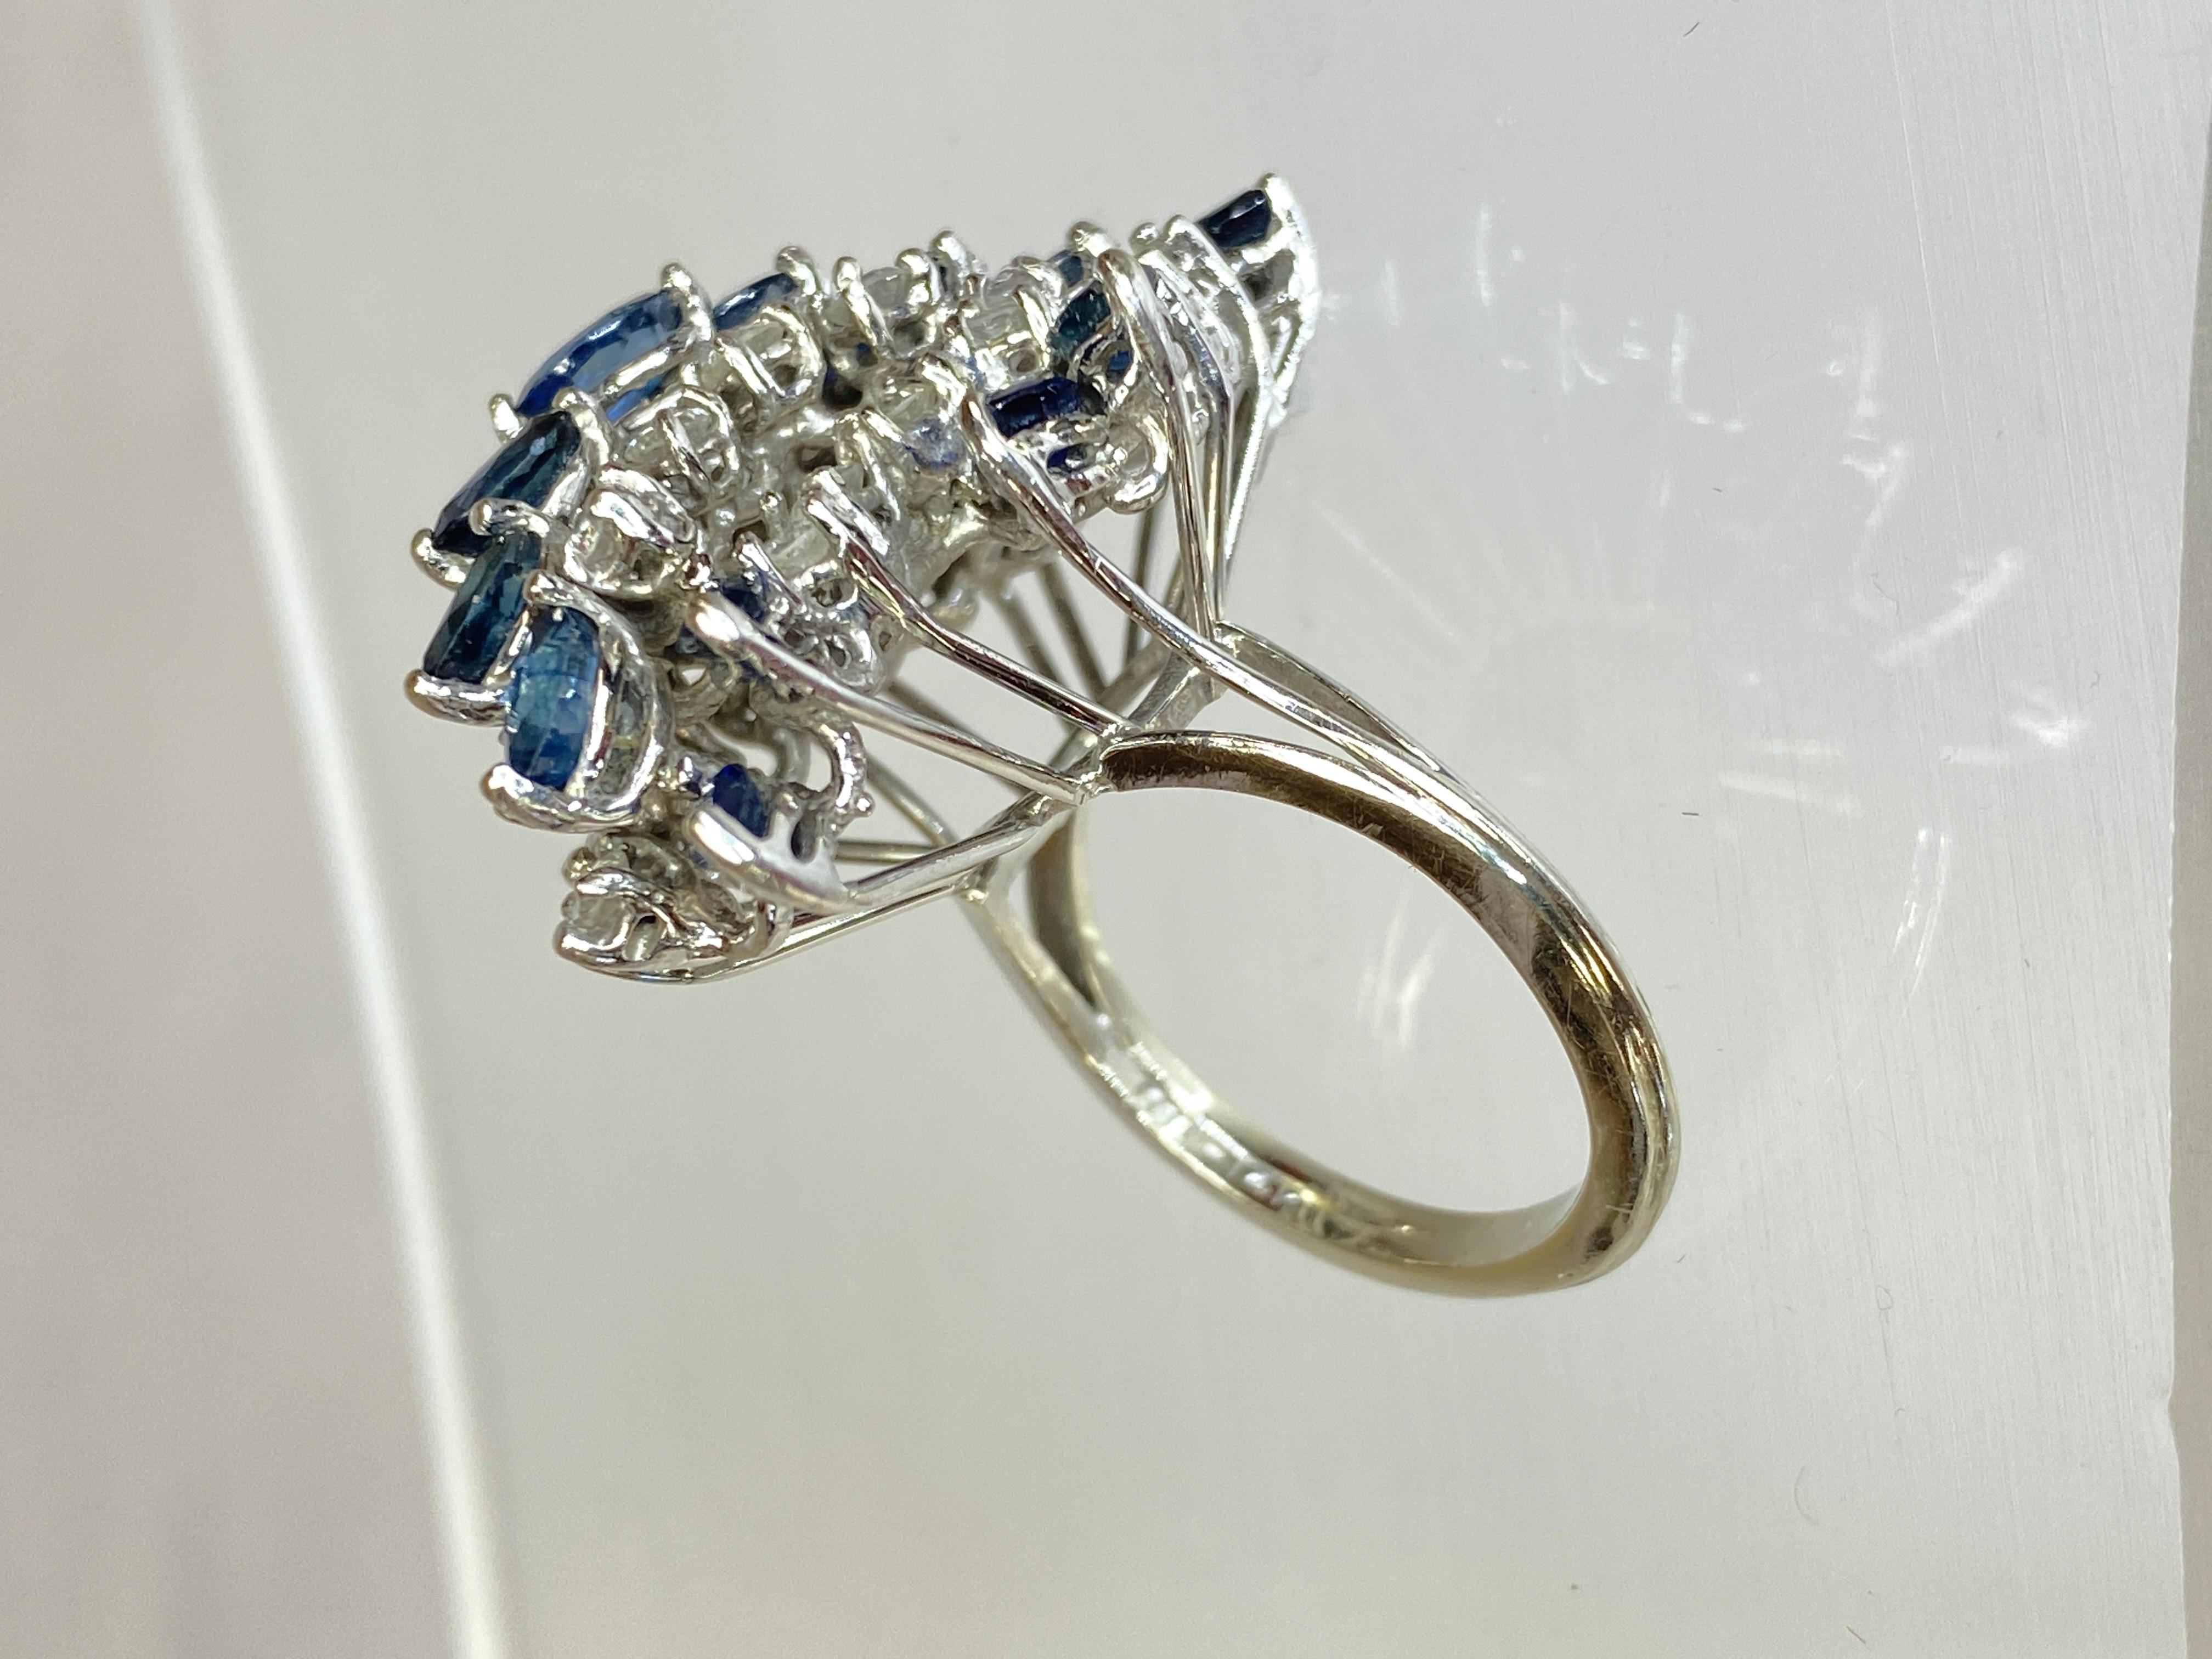 14K White Gold Diamond & Blue Sapphire 4.5 Carat Waterfall Cluster Ring Size 7.5 In Good Condition For Sale In San Jacinto, CA